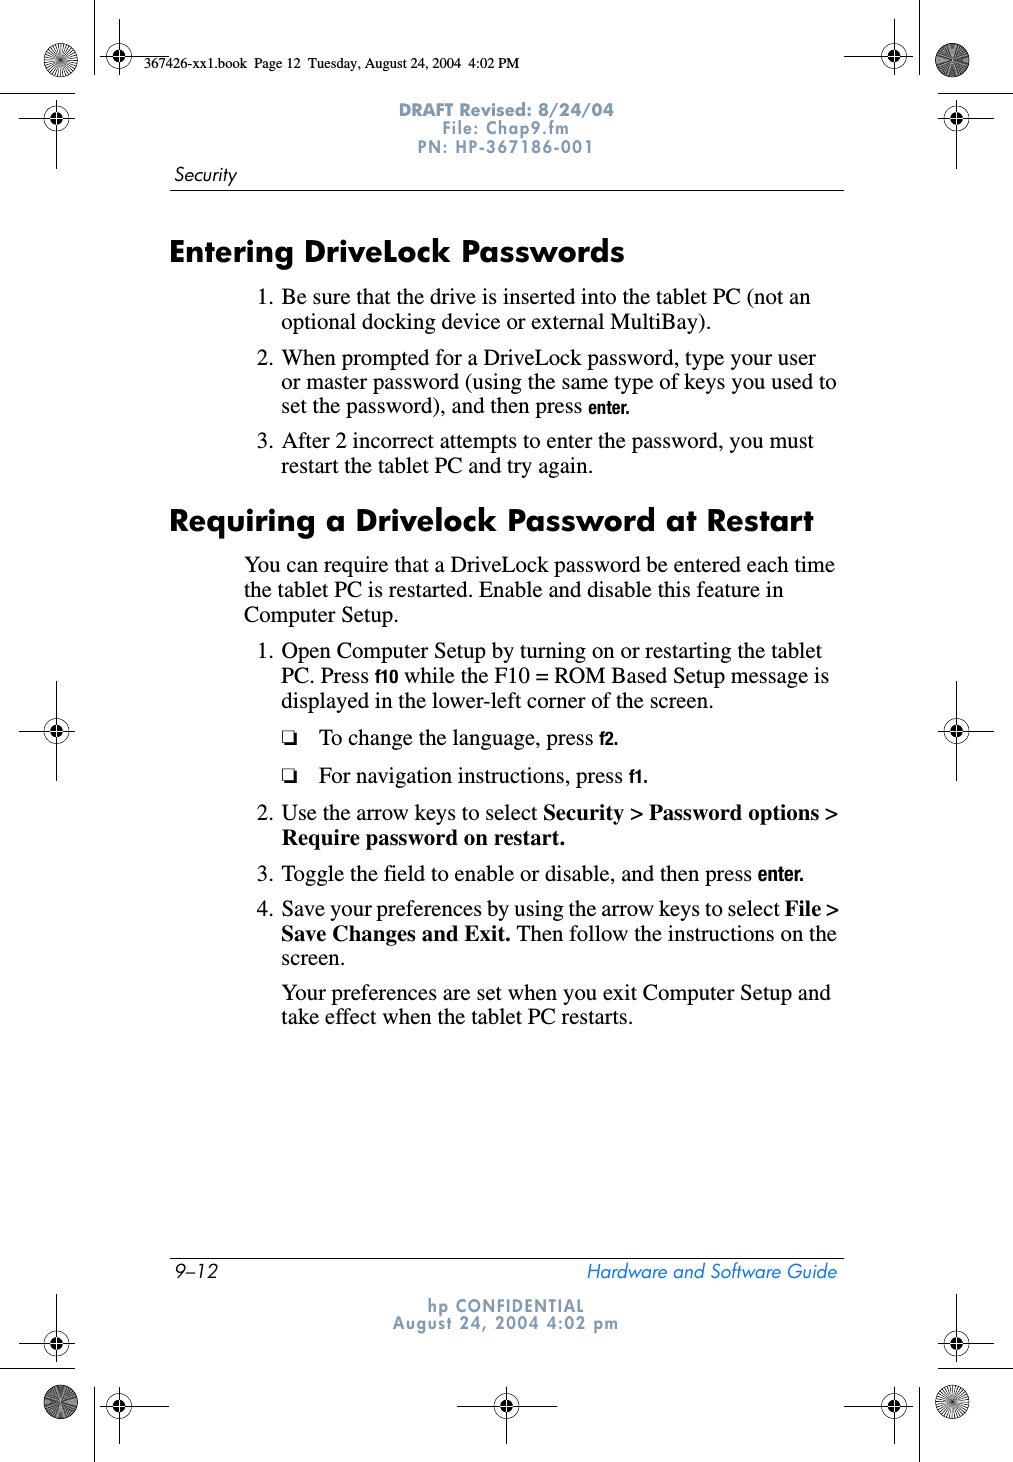 9–12 Hardware and Software GuideSecurityDRAFT Revised: 8/24/04File: Chap9.fm PN: HP-367186-001 hp CONFIDENTIALAugust 24, 2004 4:02 pmEntering DriveLock Passwords1. Be sure that the drive is inserted into the tablet PC (not an optional docking device or external MultiBay).2. When prompted for a DriveLock password, type your user or master password (using the same type of keys you used to set the password), and then press enter.3. After 2 incorrect attempts to enter the password, you must restart the tablet PC and try again.Requiring a Drivelock Password at RestartYou can require that a DriveLock password be entered each time the tablet PC is restarted. Enable and disable this feature in Computer Setup.1. Open Computer Setup by turning on or restarting the tablet PC. Press f10 while the F10 = ROM Based Setup message is displayed in the lower-left corner of the screen.❏To change the language, press f2.❏For navigation instructions, press f1.2. Use the arrow keys to select Security &gt; Password options &gt; Require password on restart.3. Toggle the field to enable or disable, and then press enter.4. Save your preferences by using the arrow keys to select File &gt; Save Changes and Exit. Then follow the instructions on the screen.Your preferences are set when you exit Computer Setup and take effect when the tablet PC restarts.367426-xx1.book  Page 12  Tuesday, August 24, 2004  4:02 PM